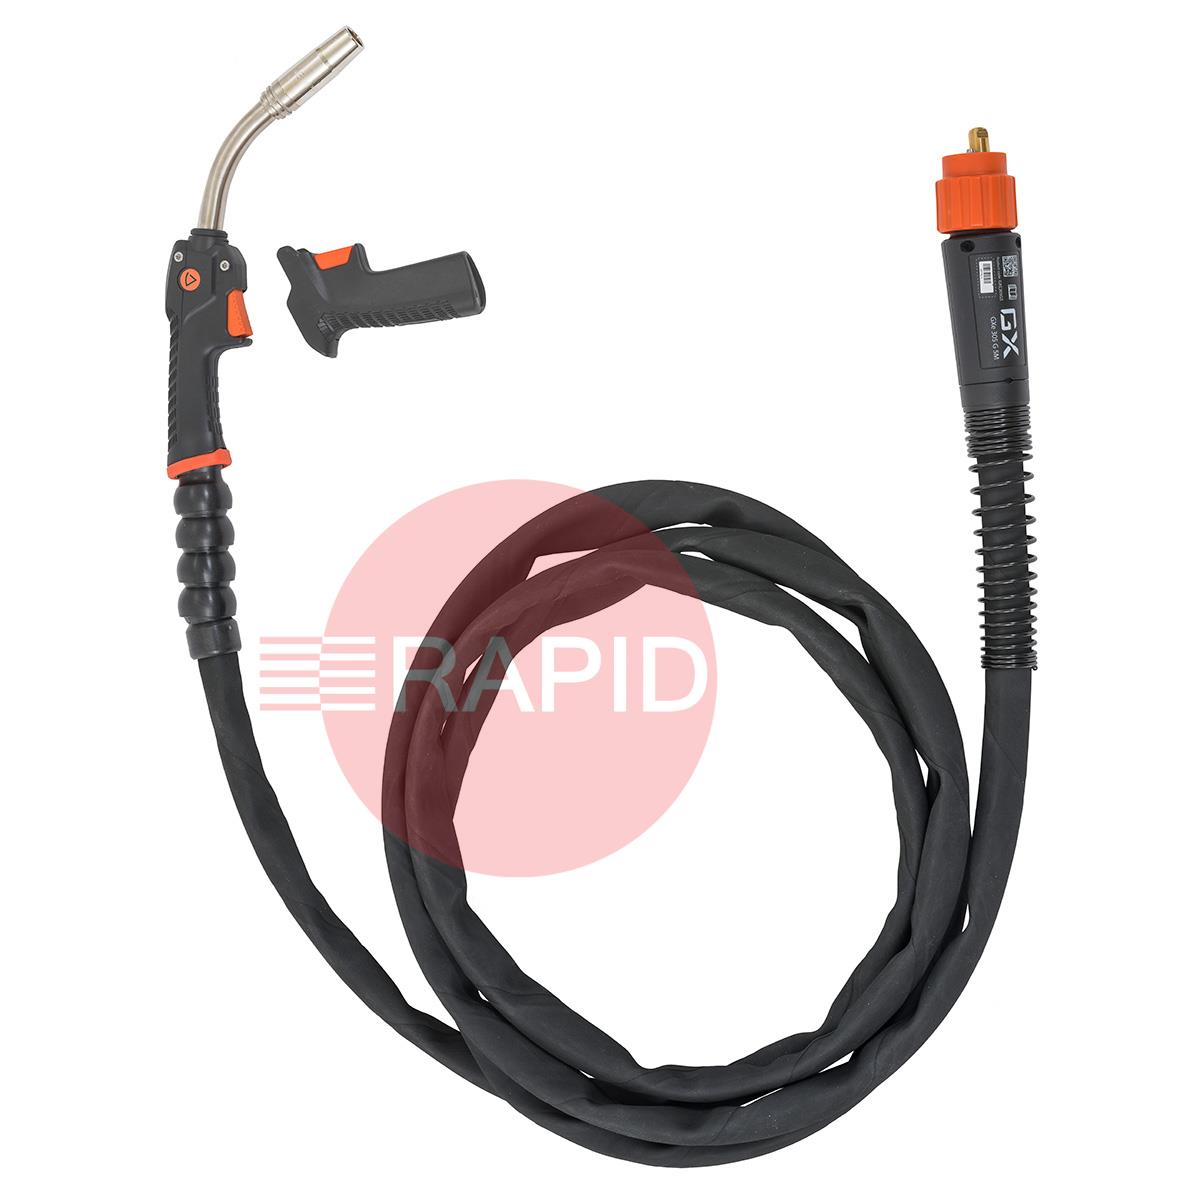 GXE305G  Kemppi Flexlite GXe K5 305G Air Cooled 300A MIG Torch, with Euro Connection